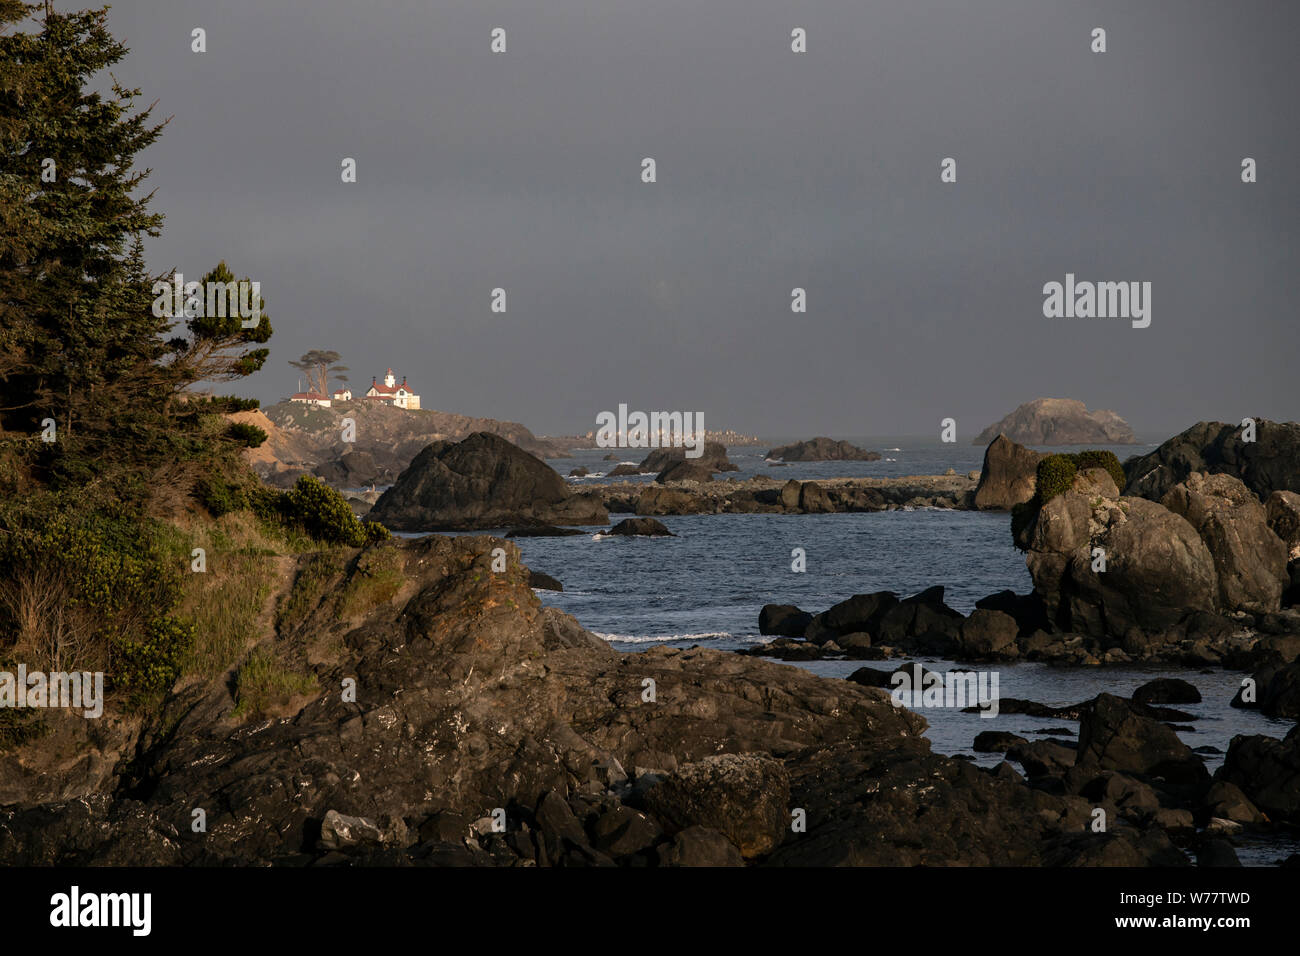 CA03426-00...CALIFORNIA - Battery Point Lighthouse in Crescent City. Foto Stock